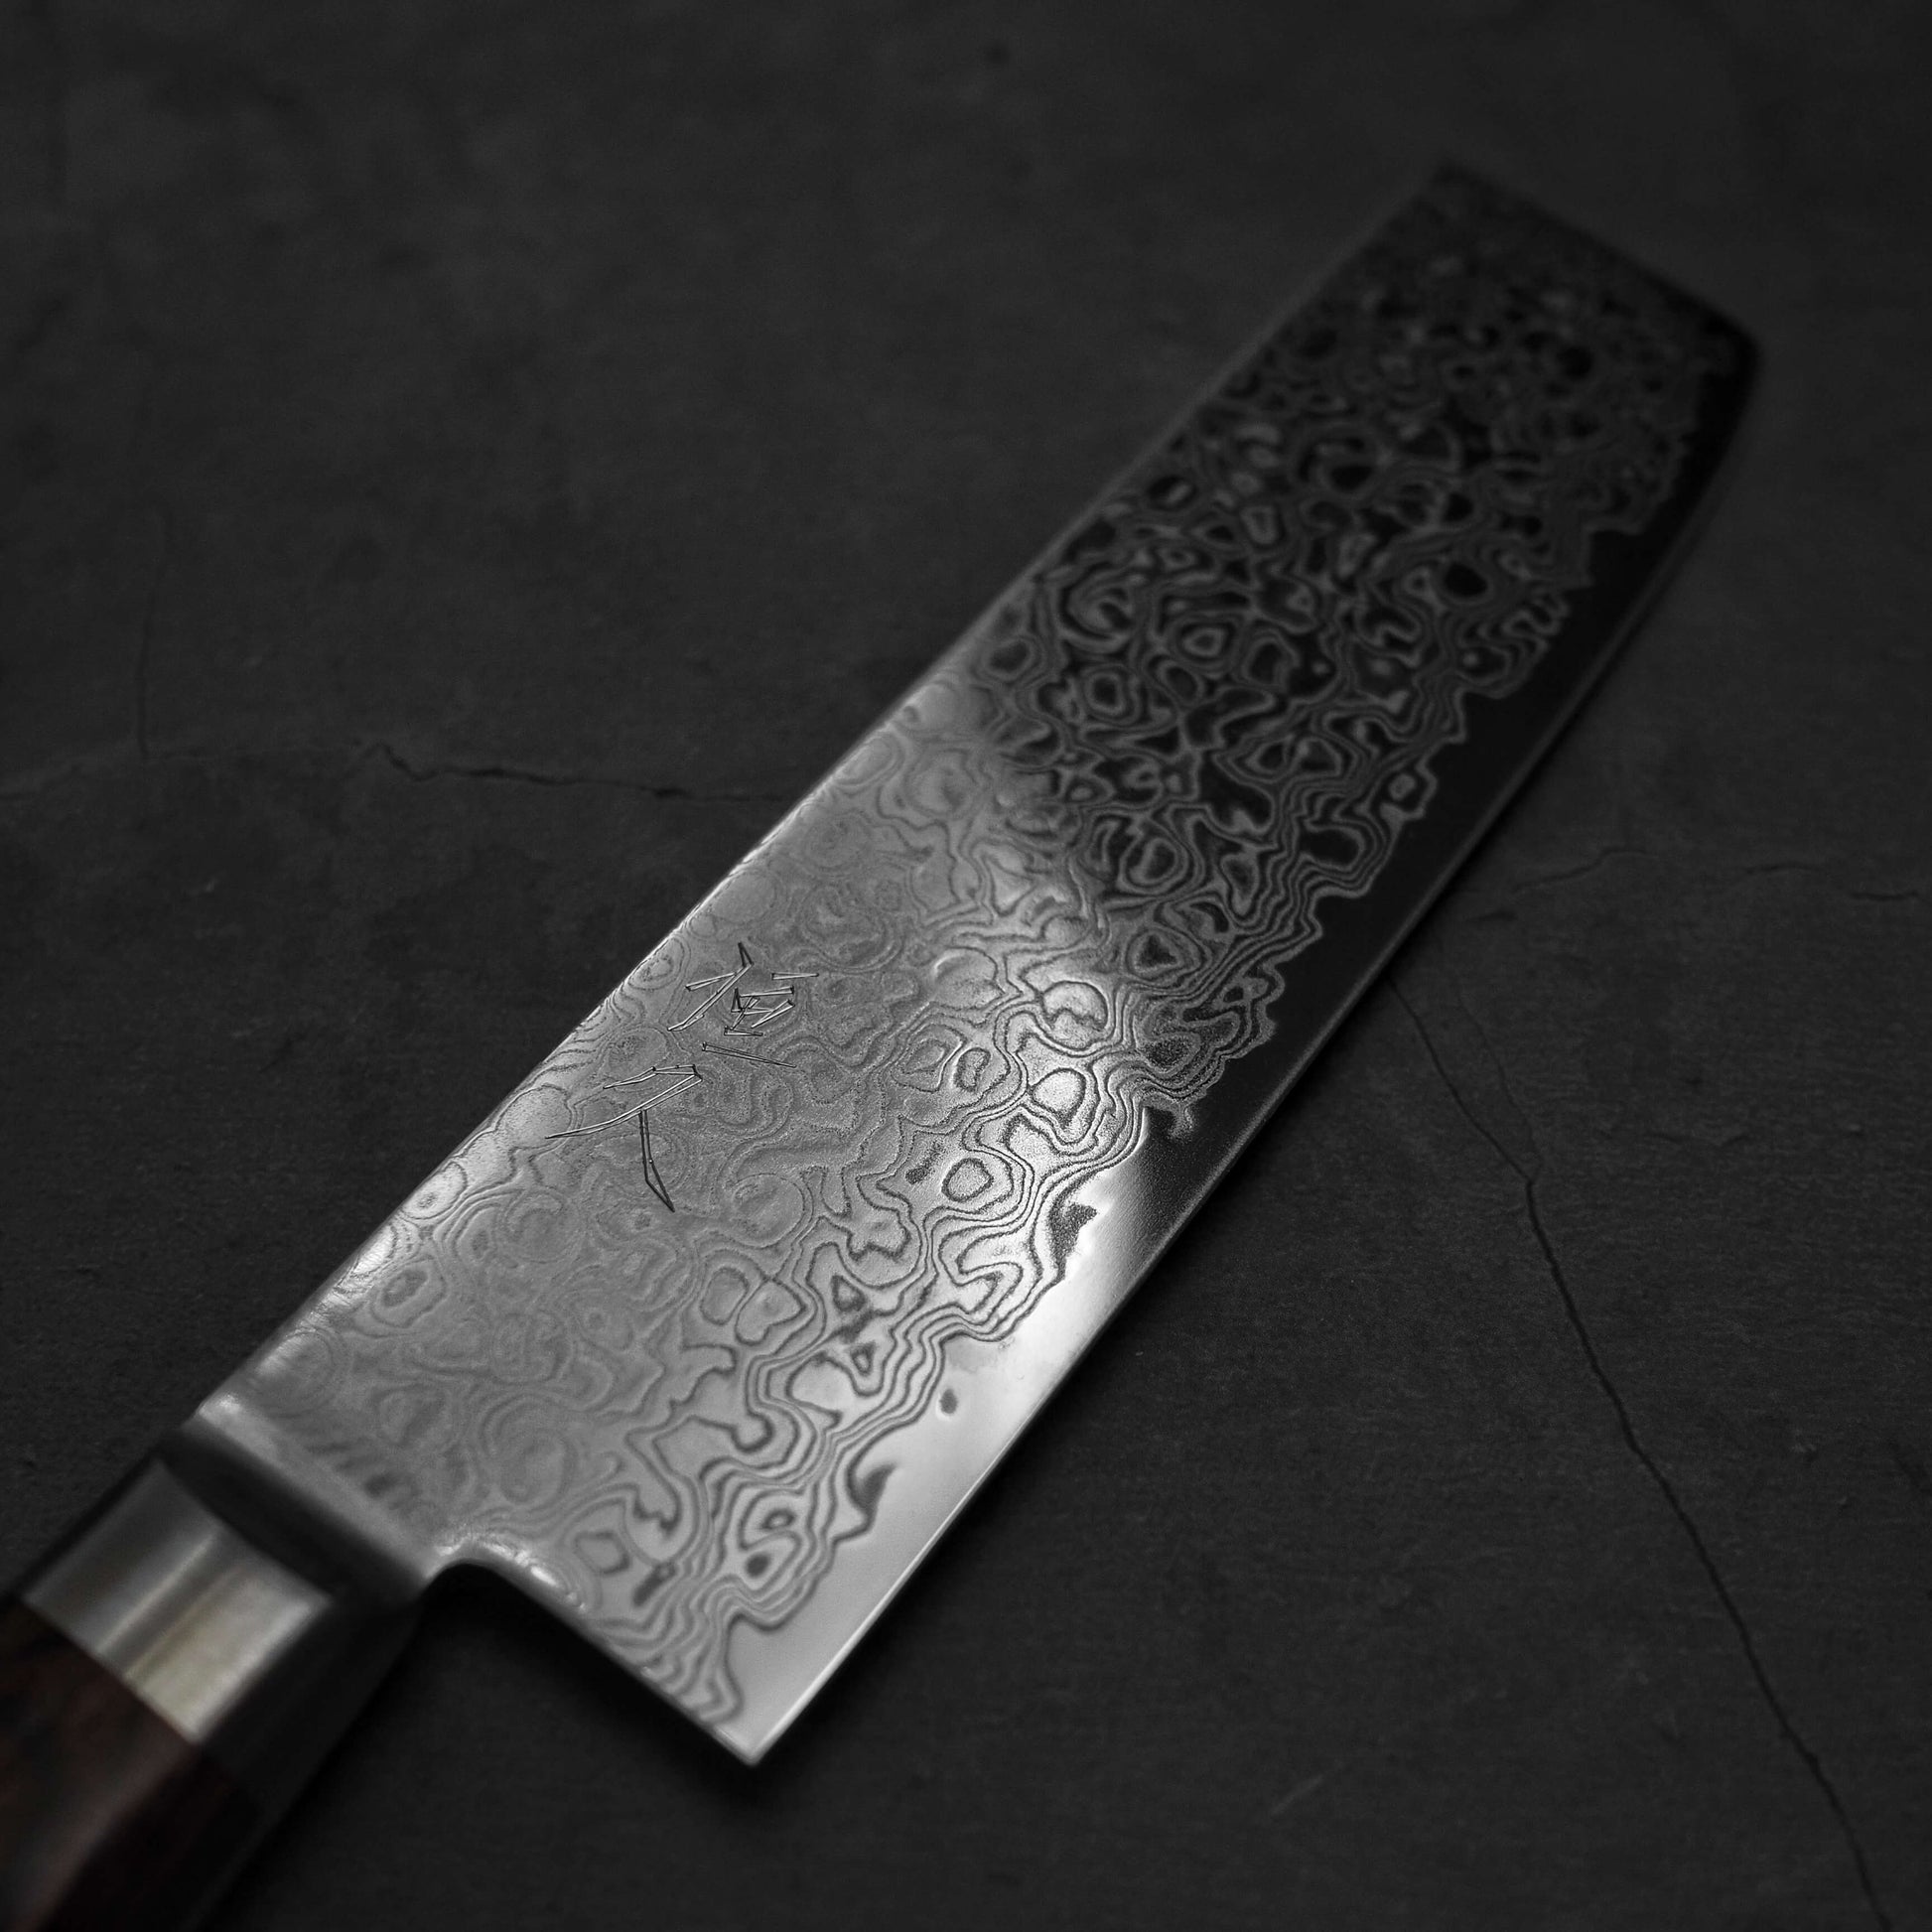 Angled view of Tsunehisa ZA18 damascus nakiri knife. Image shows the right side of the blade